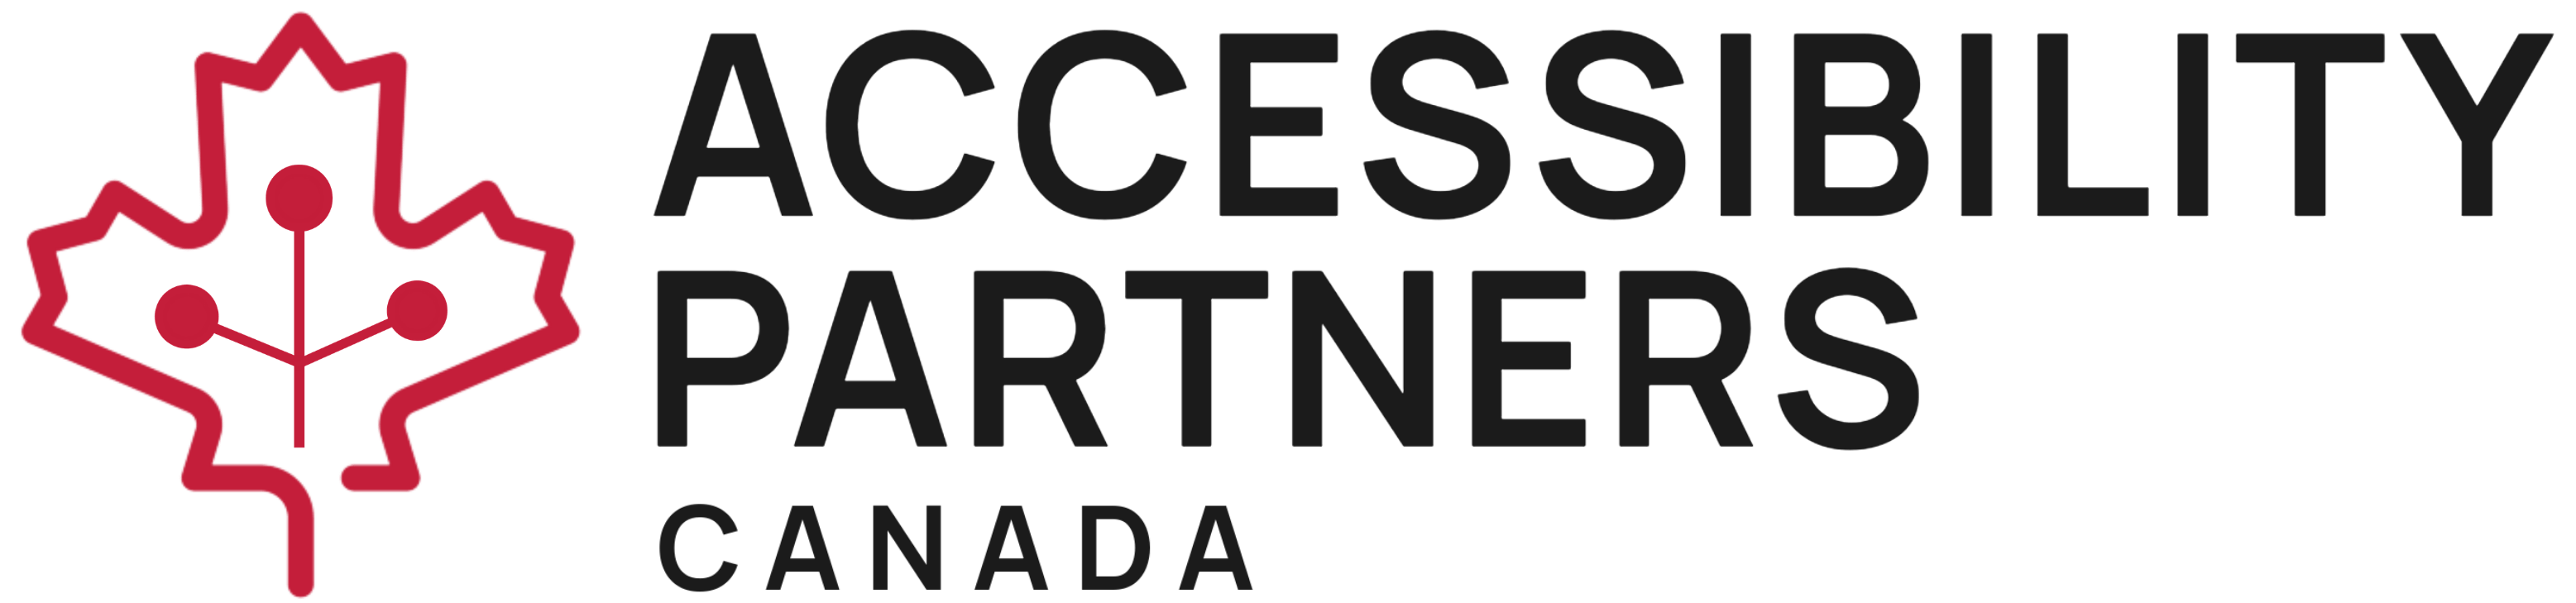 Accessibility Partners Canada